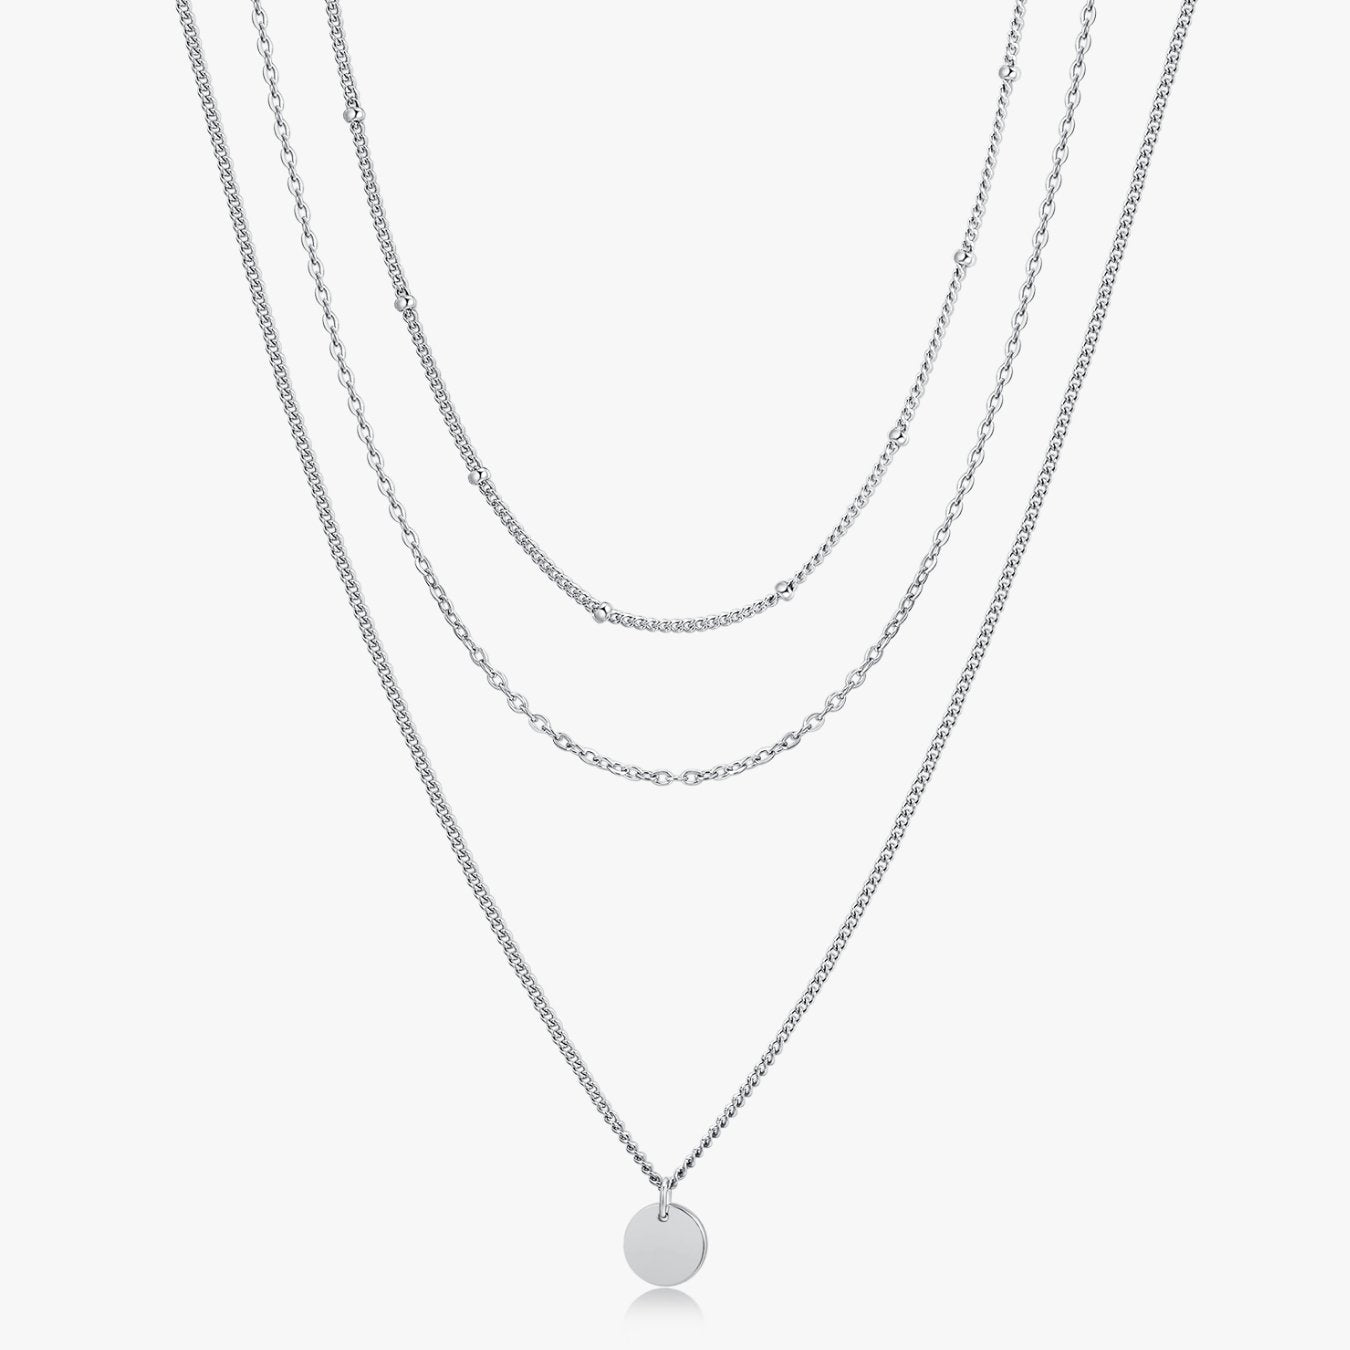 Triple Layered Necklace in Silver - Flaire & Co.